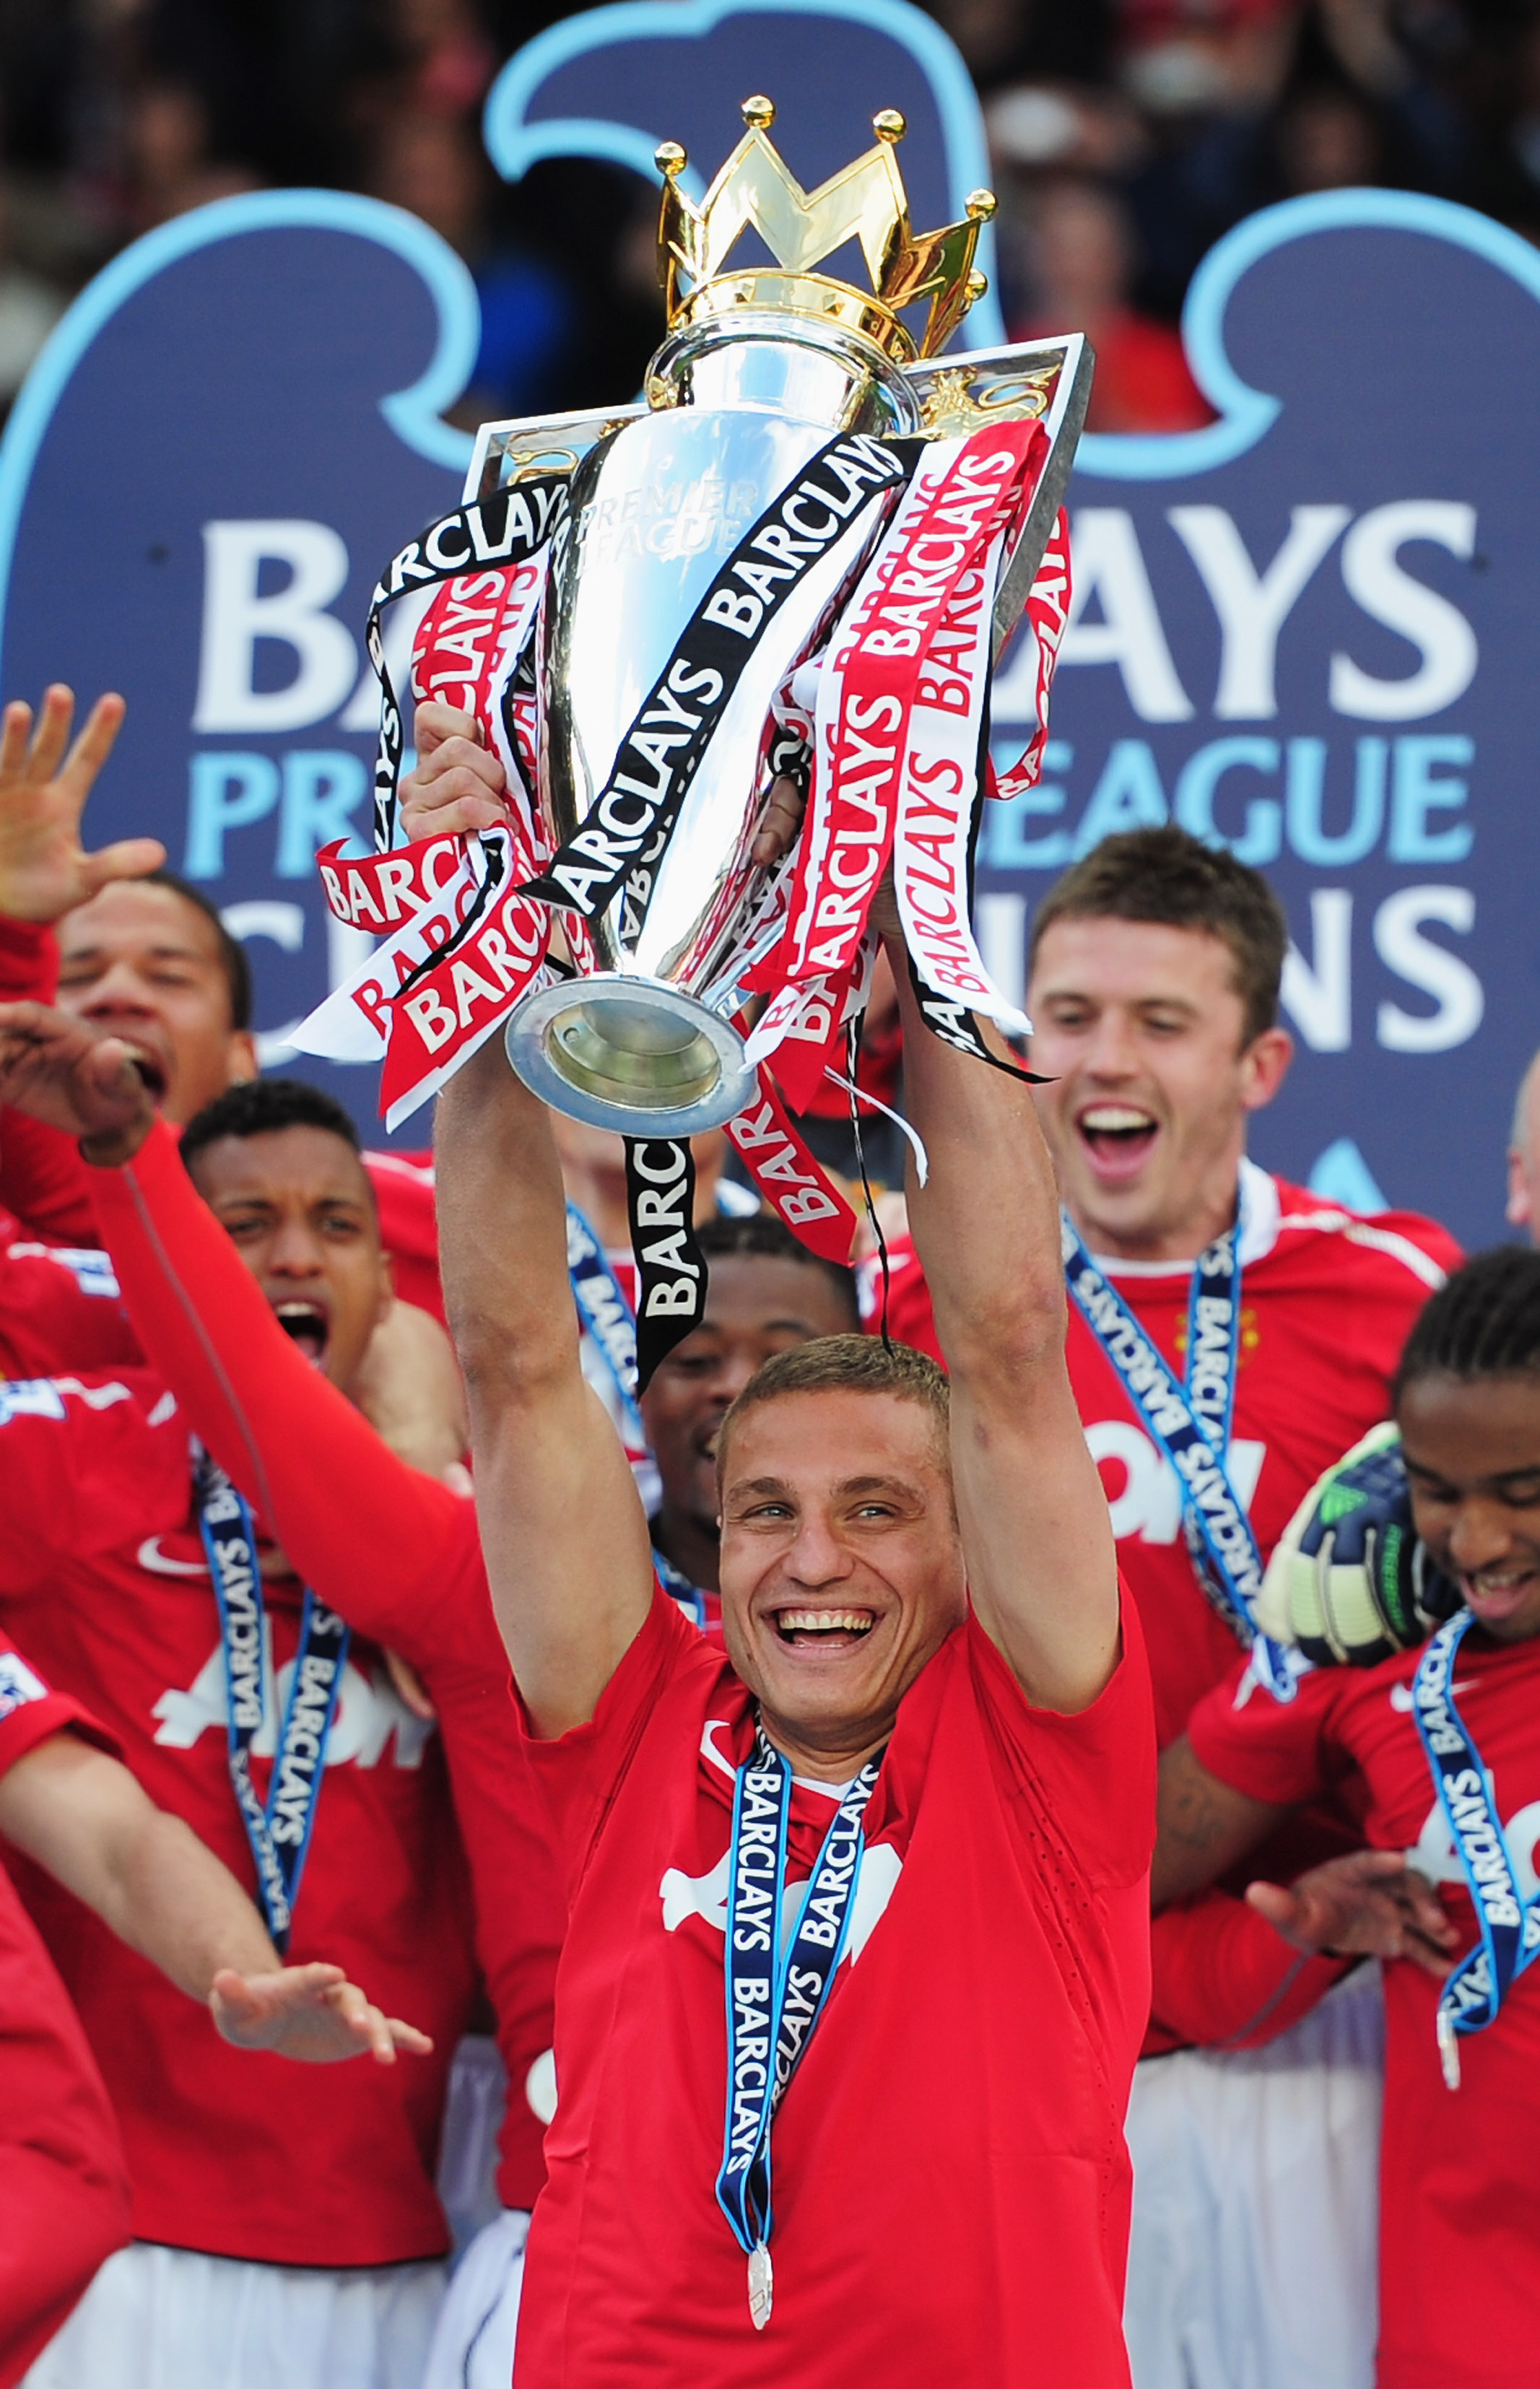 MANCHESTER, ENGLAND - MAY 22:  Captain Nemanja Vidic of Manchester United lifts the Premier League trophy after the Barclays Premier League match between Manchester United and Blackpool at Old Trafford on May 22, 2011 in Manchester, England. Manchester Un